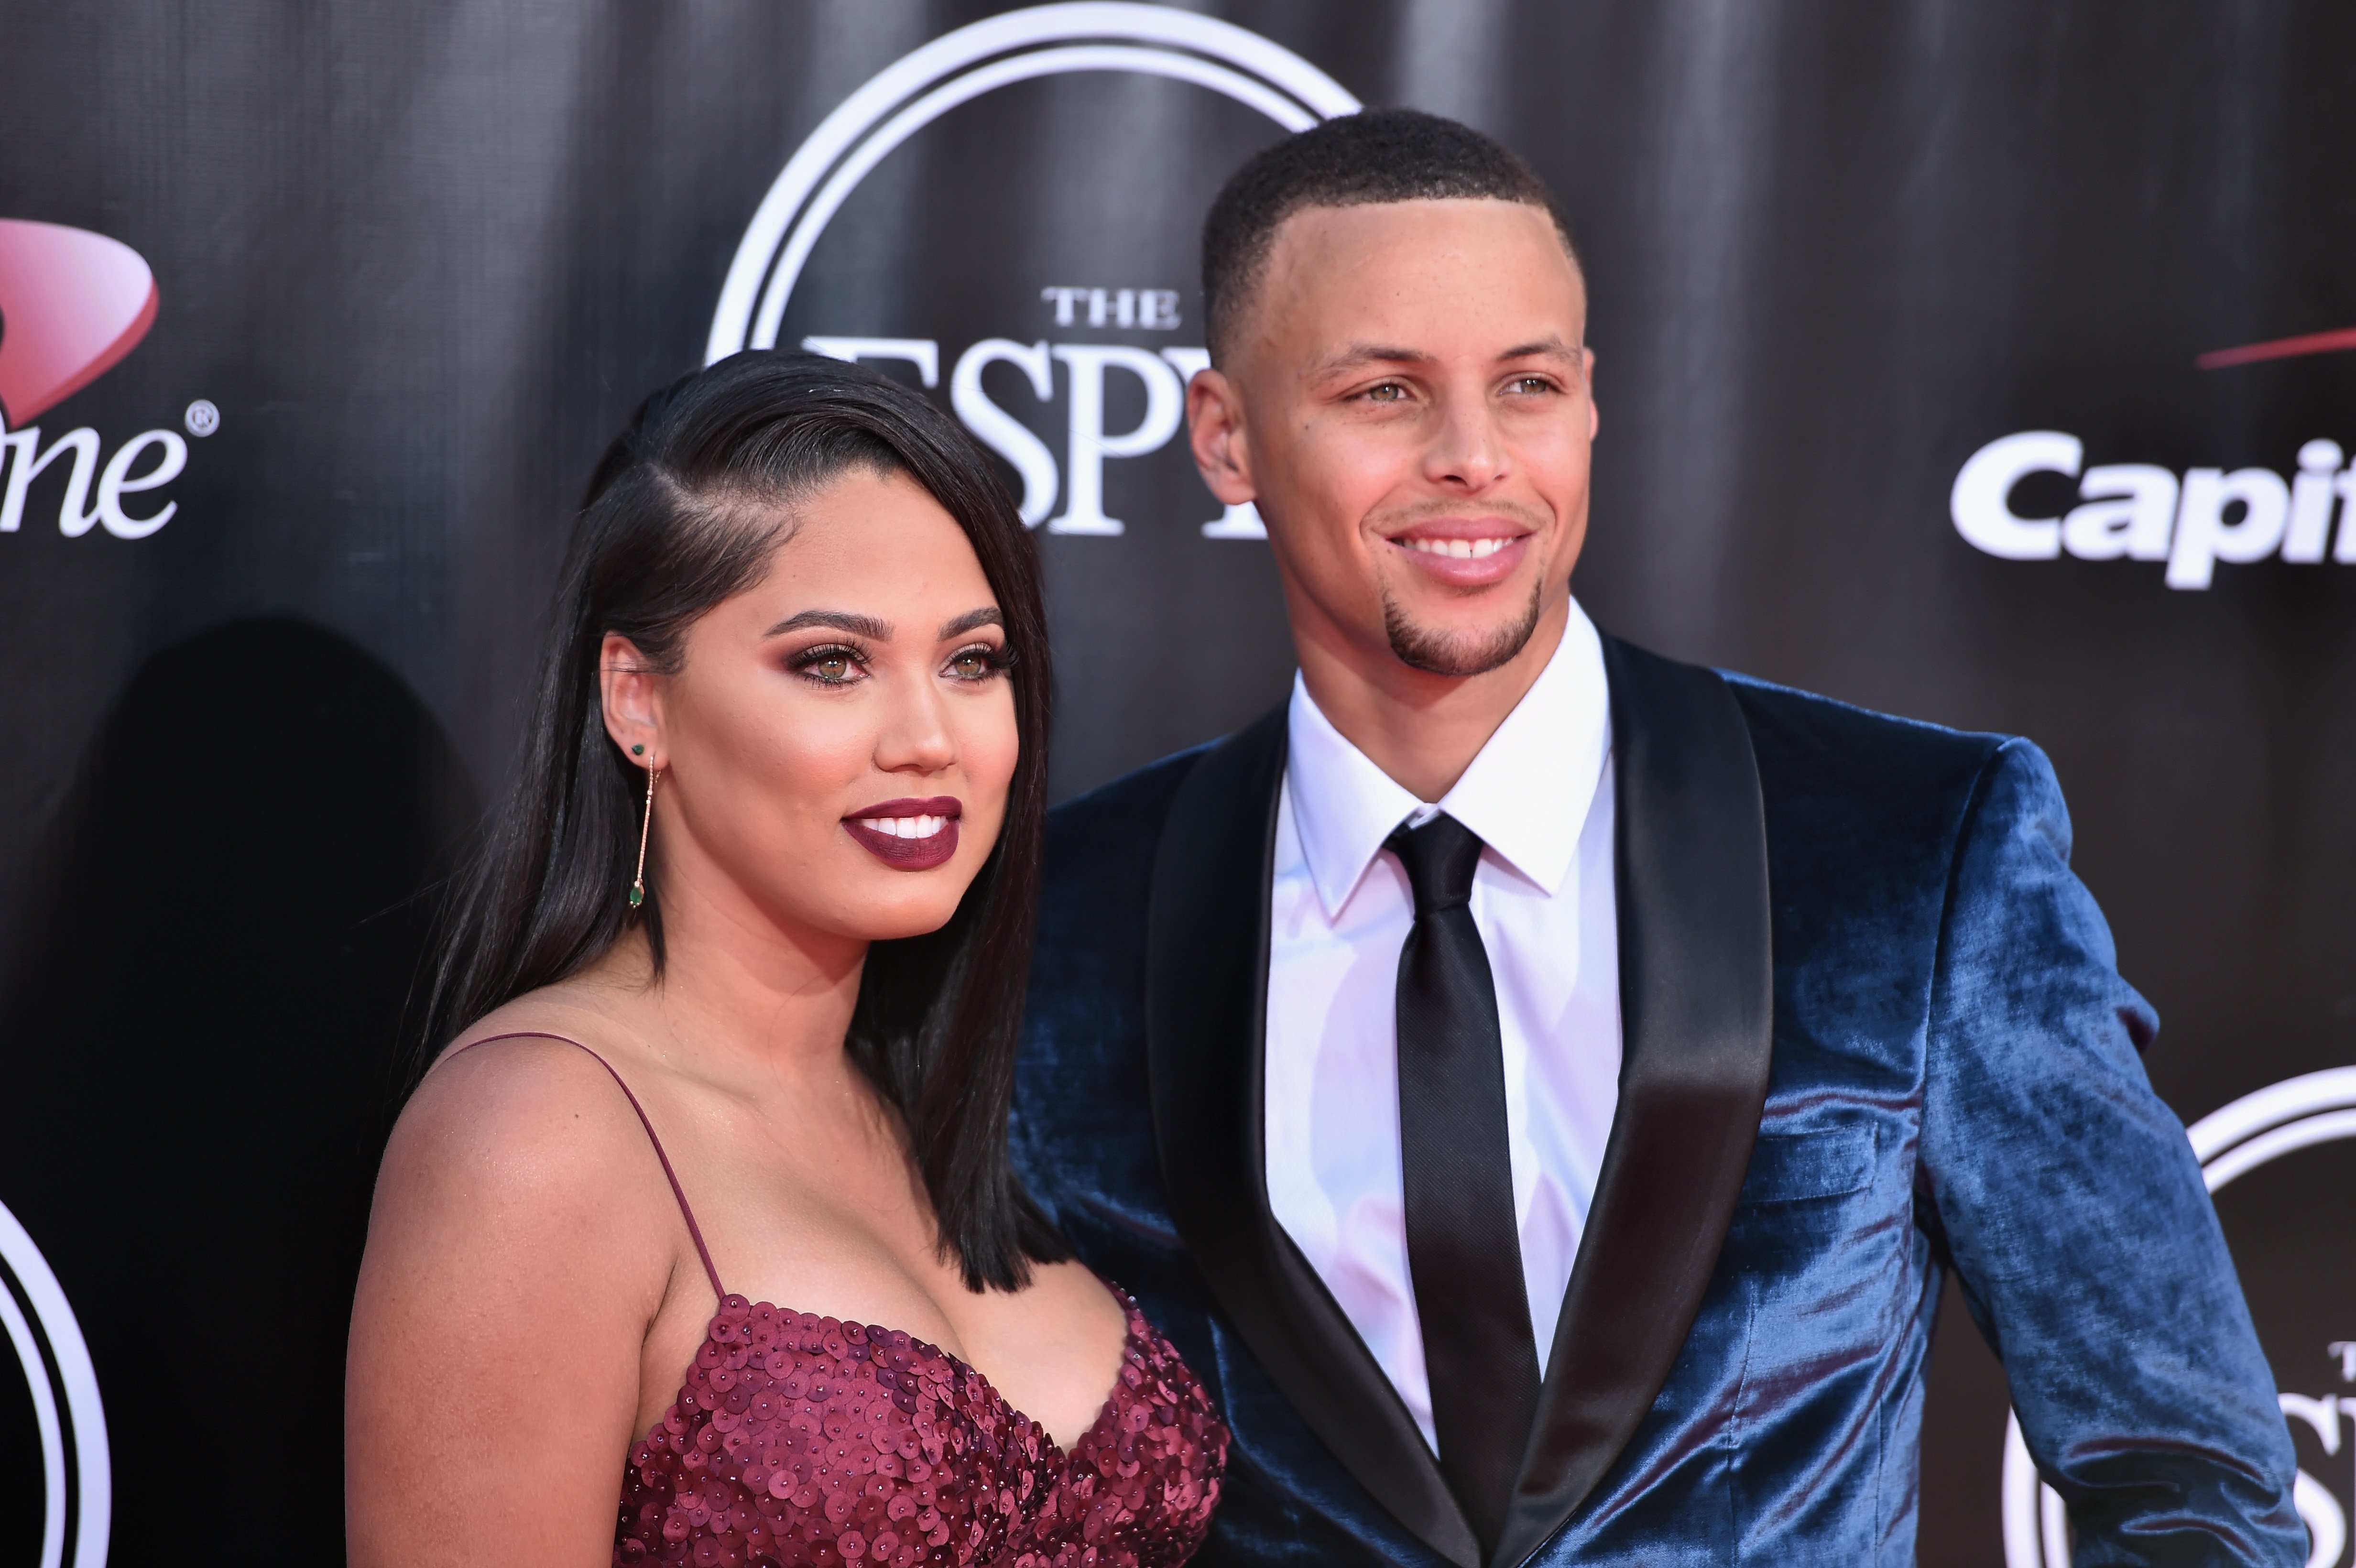 NBA power couple Stephen and Ayesha Curry attending the 2016 ESPYs. | Photo: Getty Images